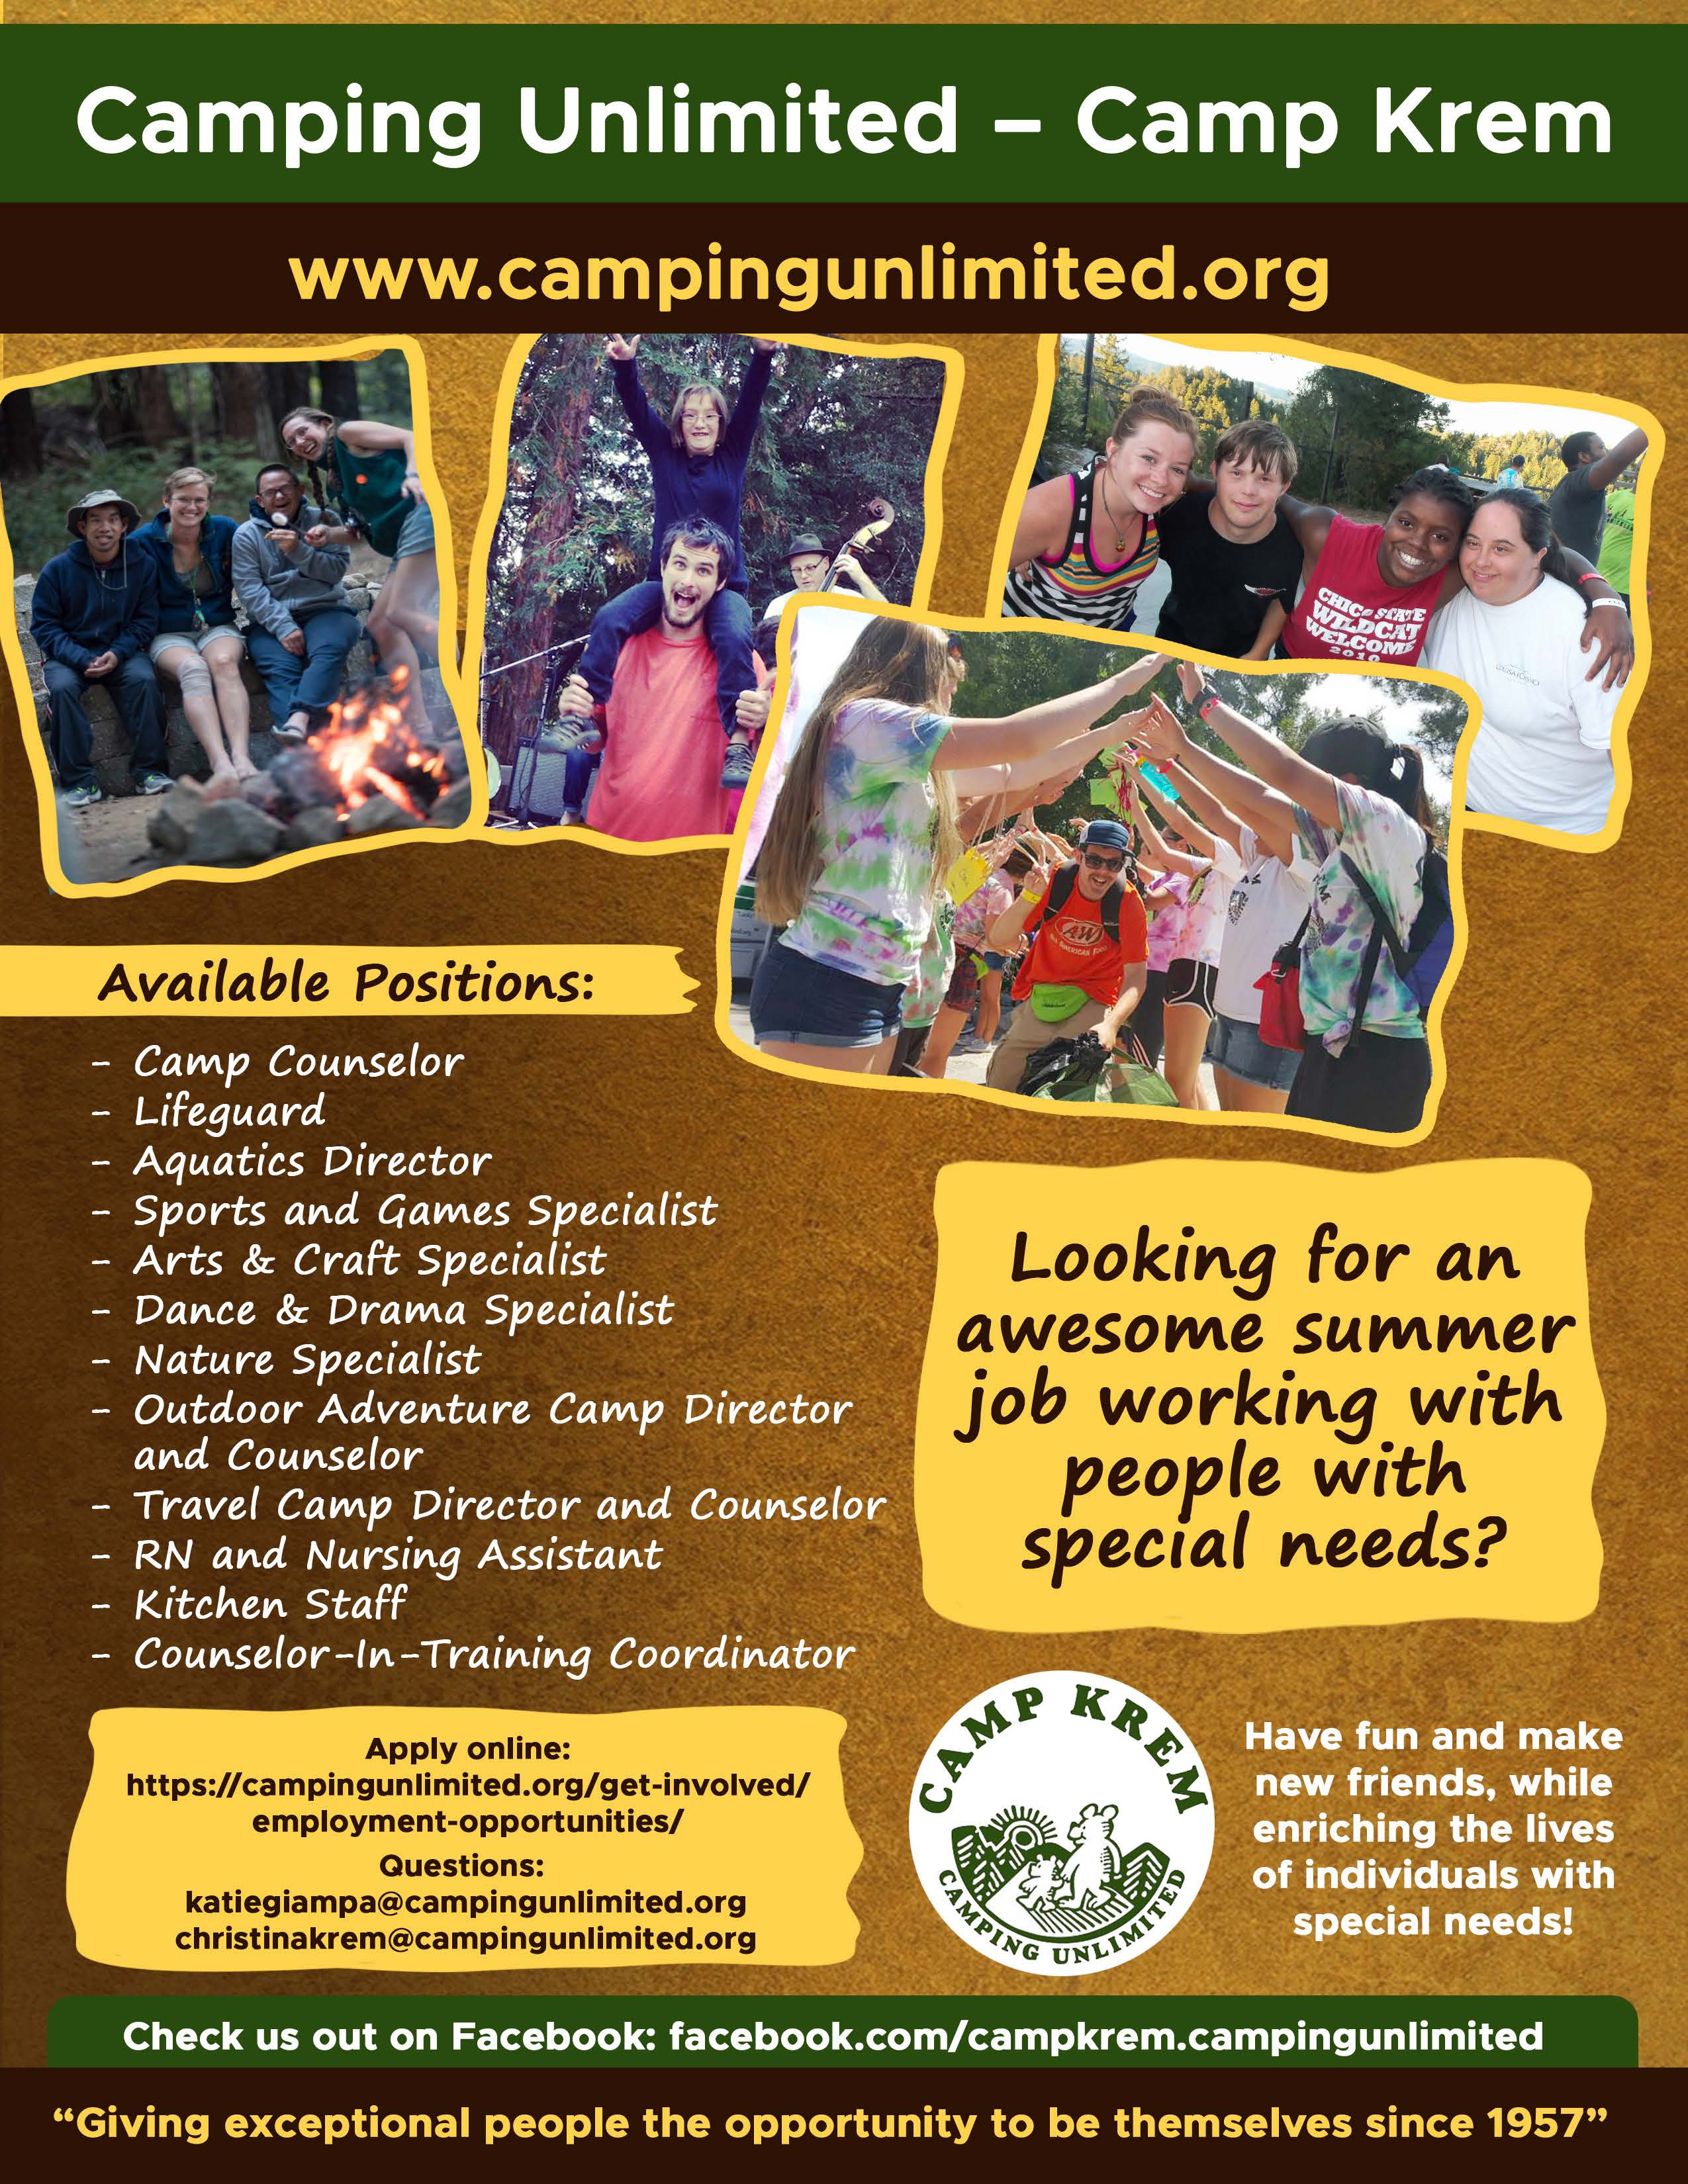 Camping Unlimited - Camp Krem www.campingunlimited.org Looking for an awesome summer job working with people with special needs? Apply online: https://campingunlimited.org/get-involved/employment-opportunities